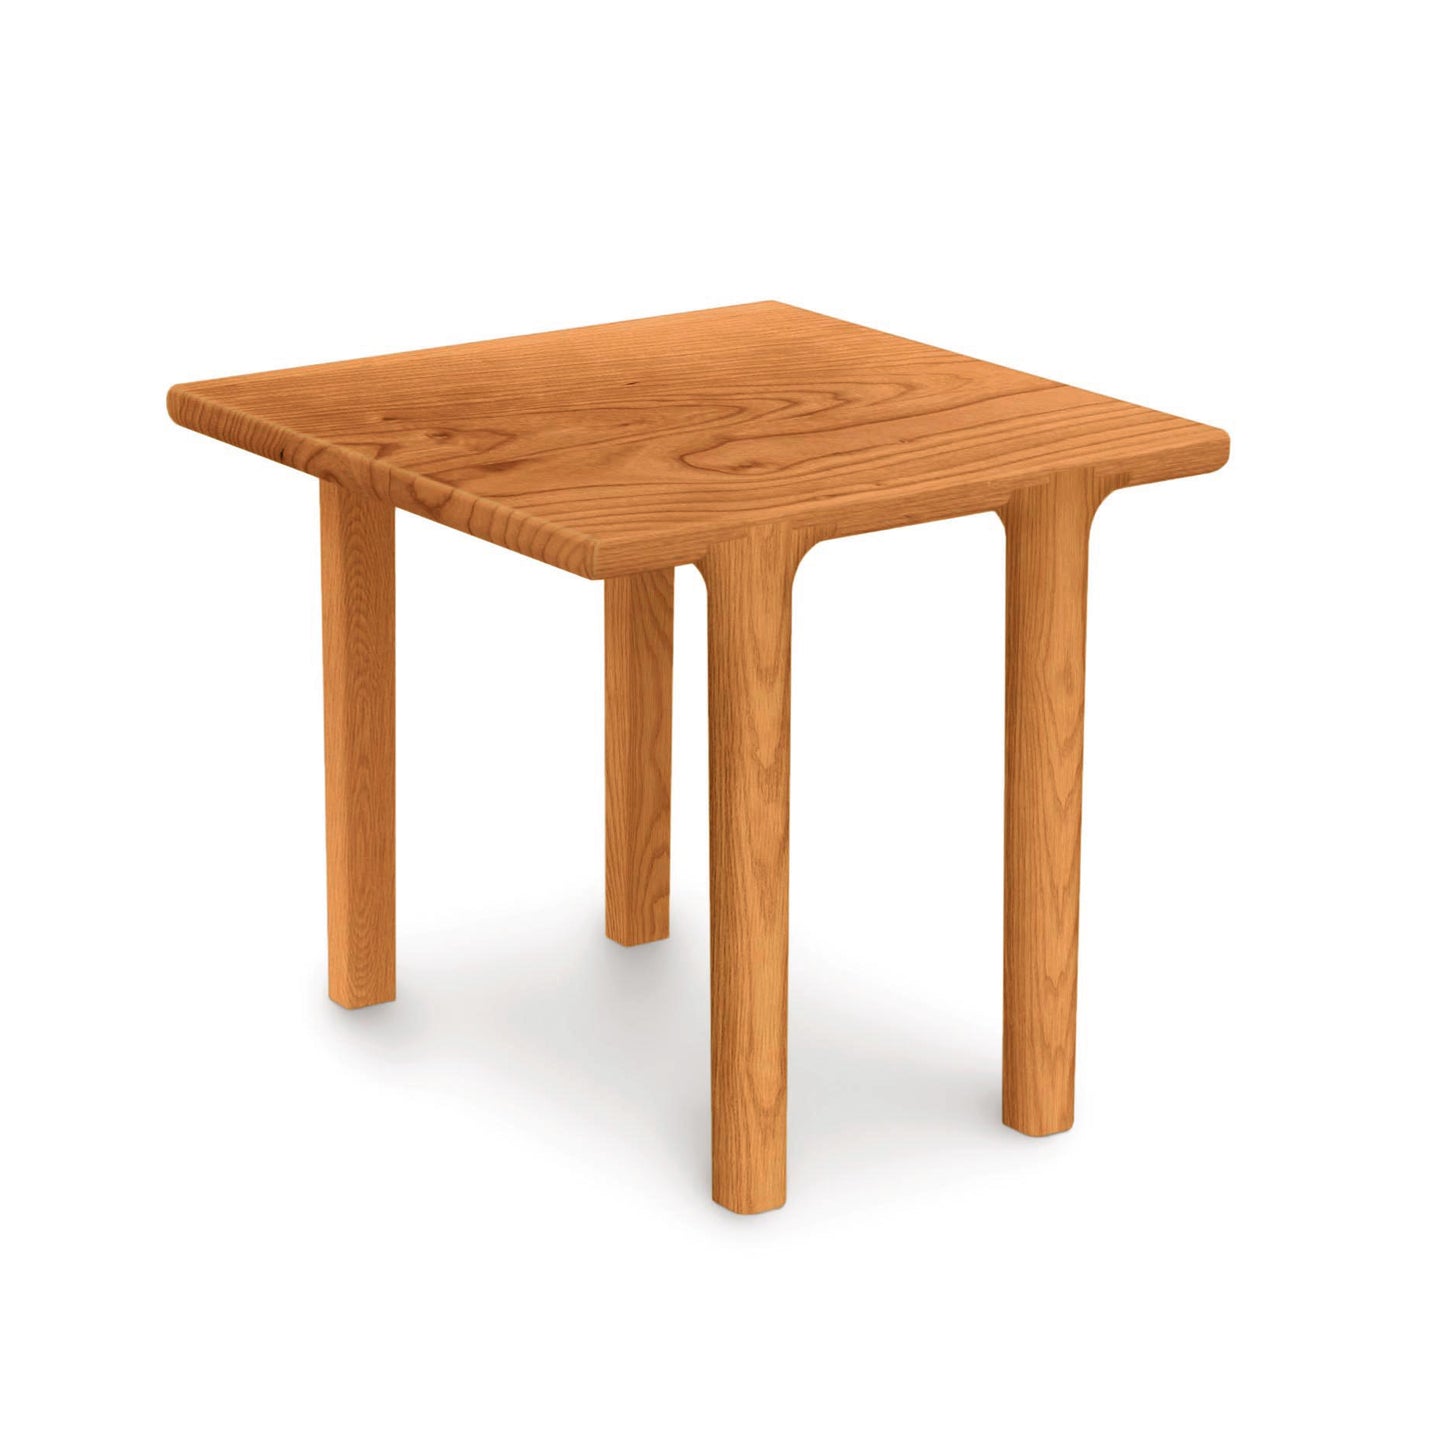 A Sierra Square End Table by Copeland Furniture, with contemporary lines, North American hardwood four-legged table isolated on a white background.